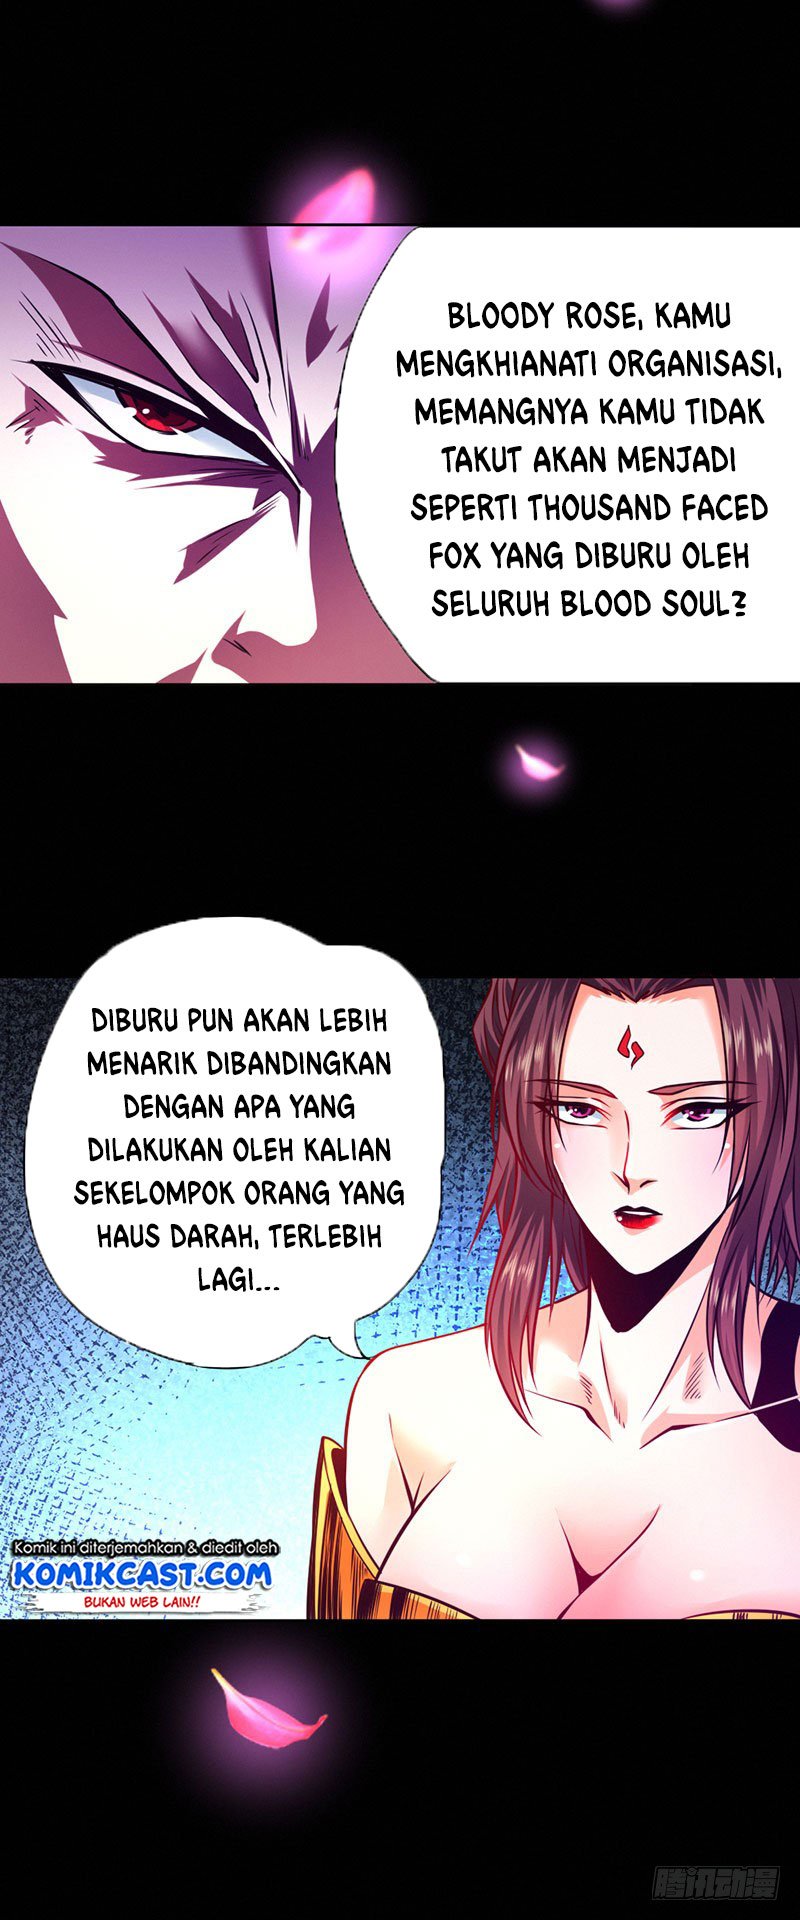 First Rate Master Chapter 85